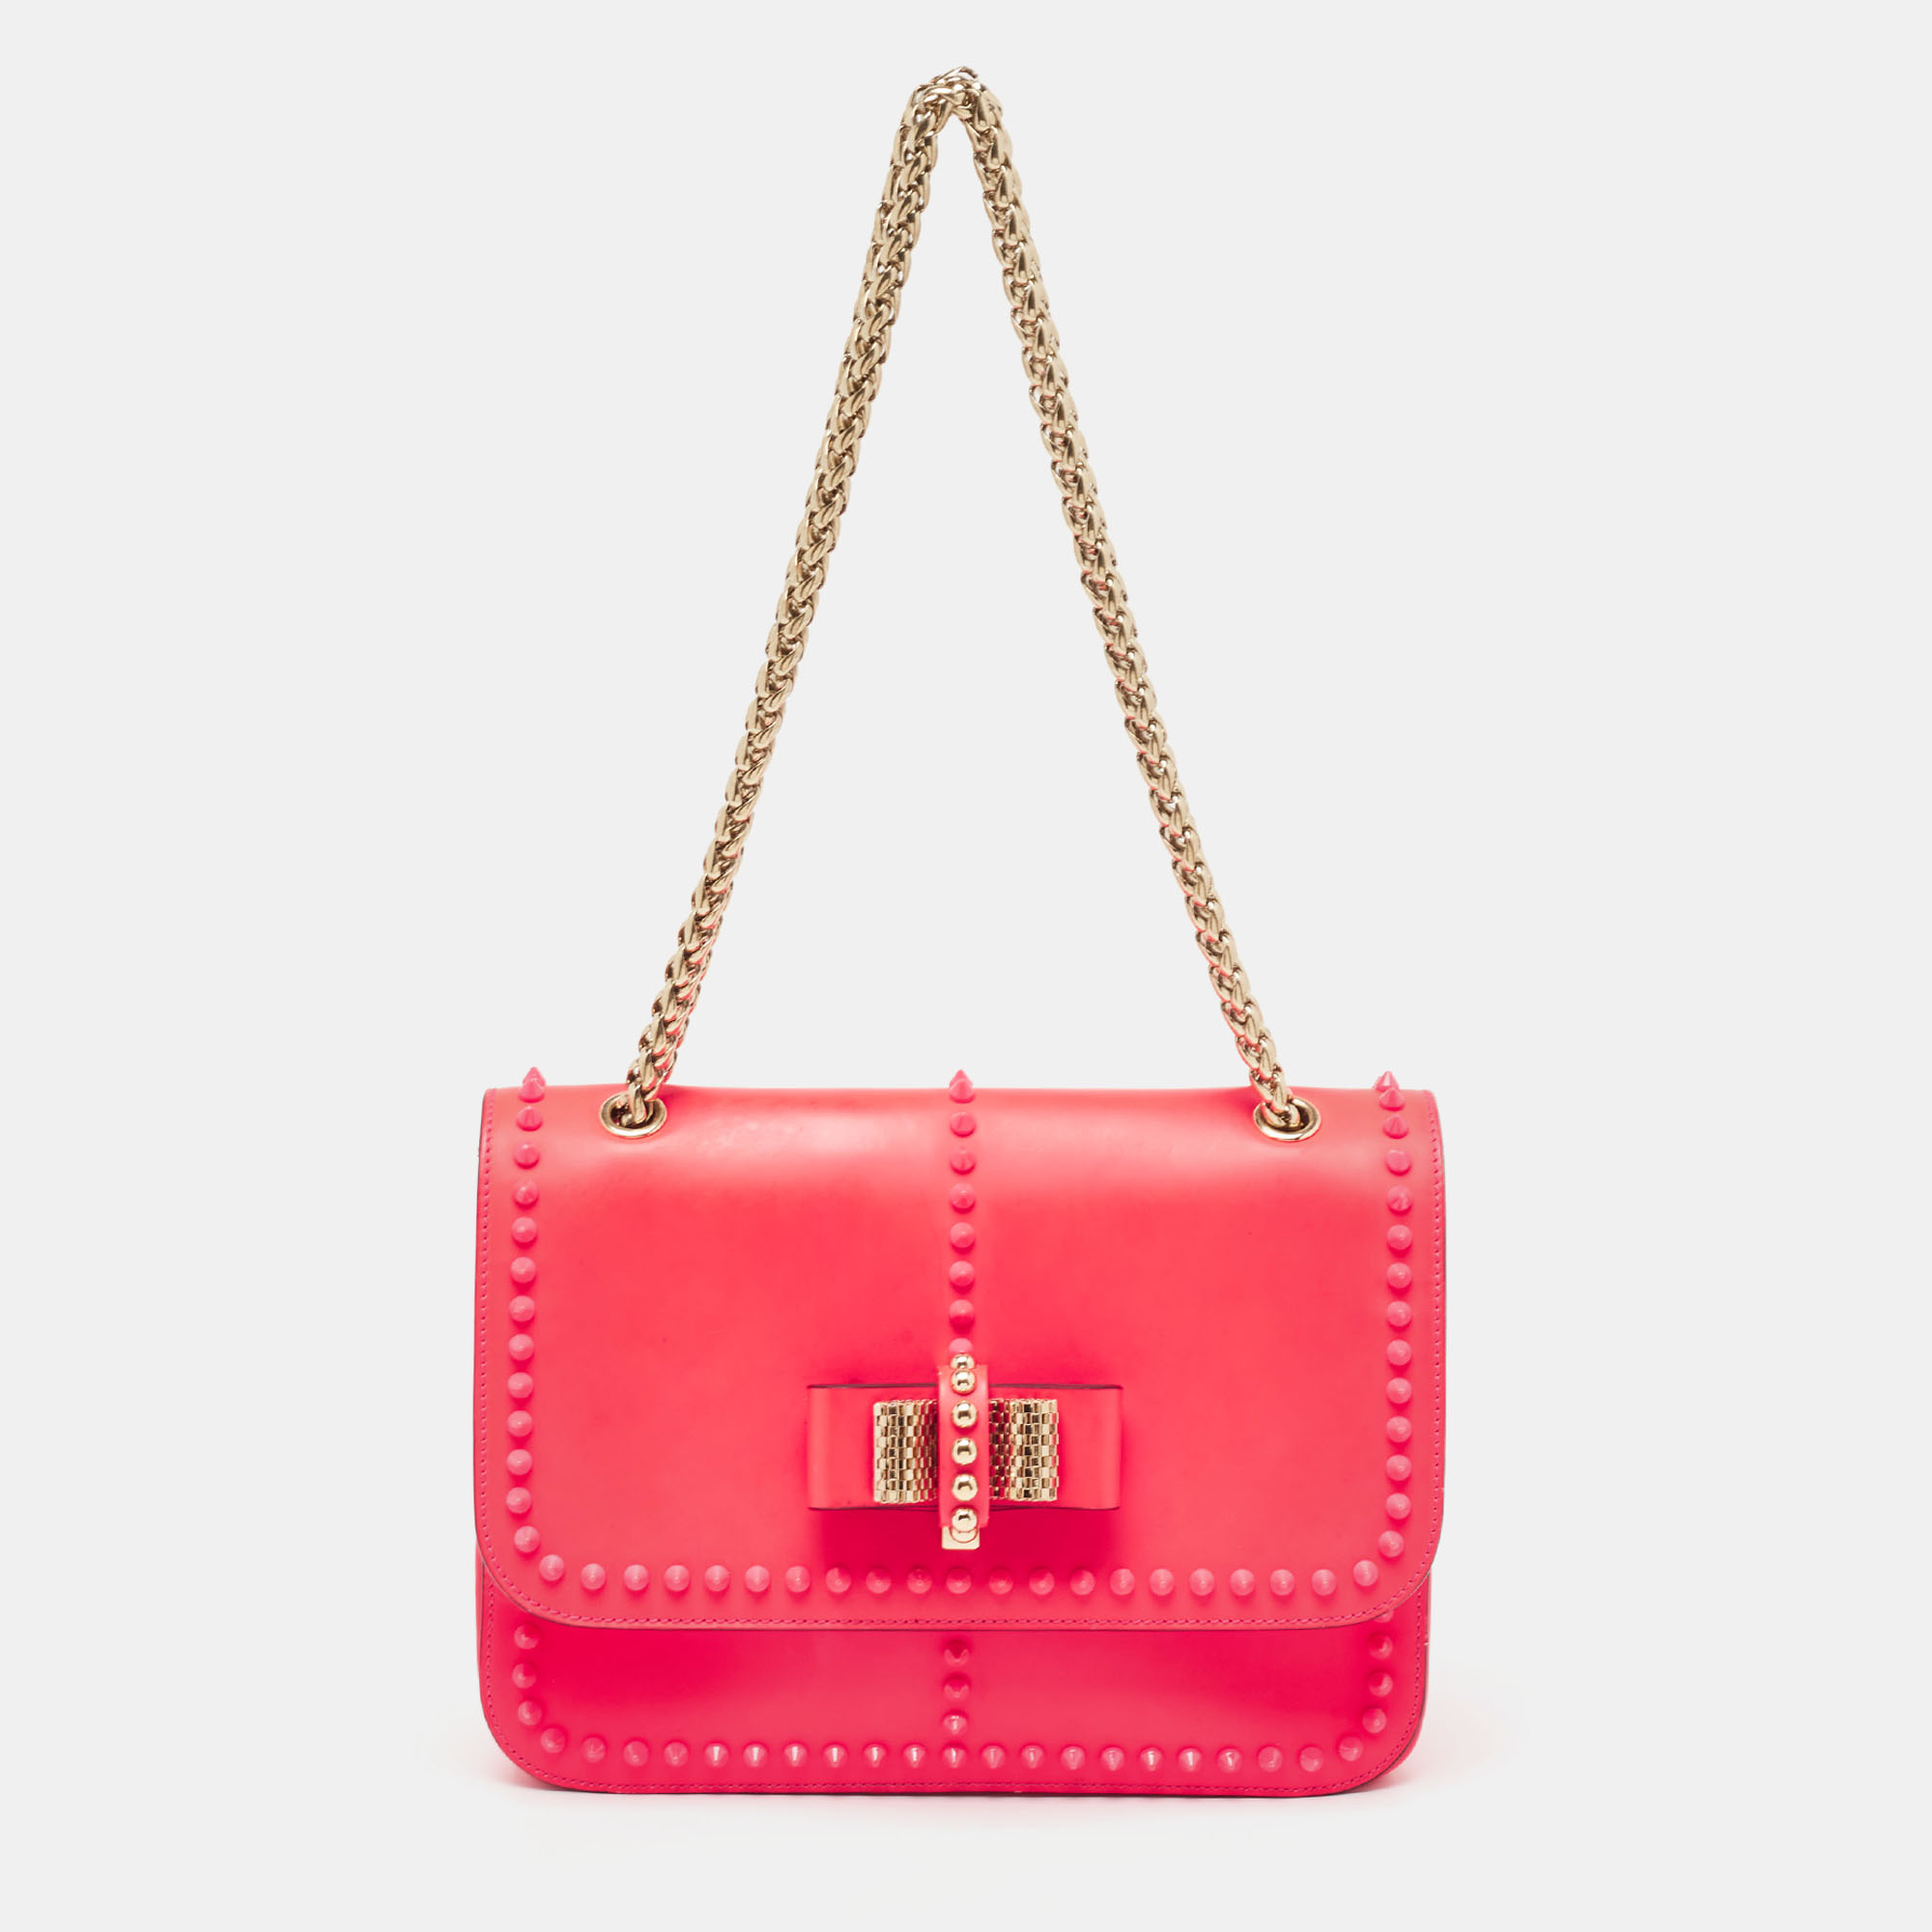 Pre-owned Christian Louboutin Neon Pink Matte And Patent Leather Sweet Charity Shoulder Bag